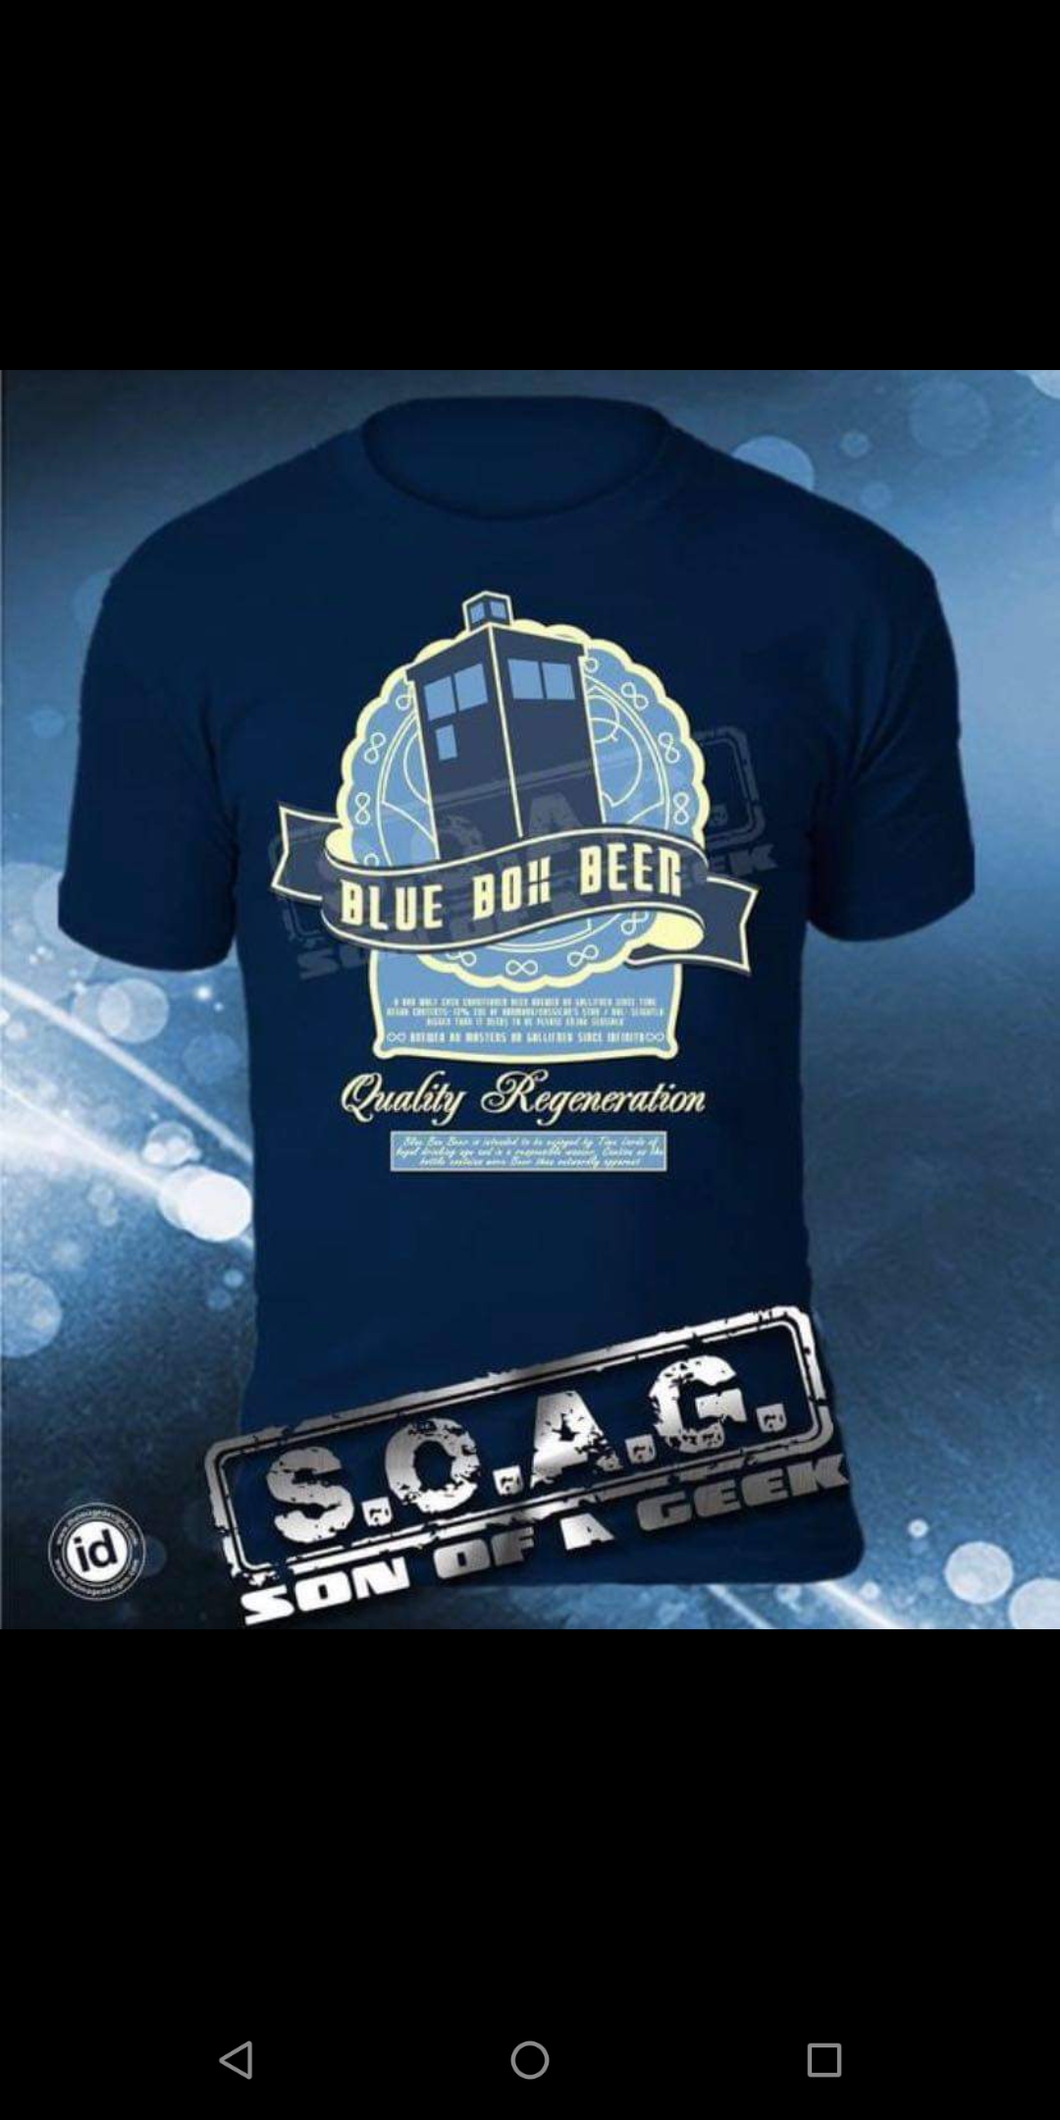 DR WHO inspired Blue Box Beer Tee Shirt